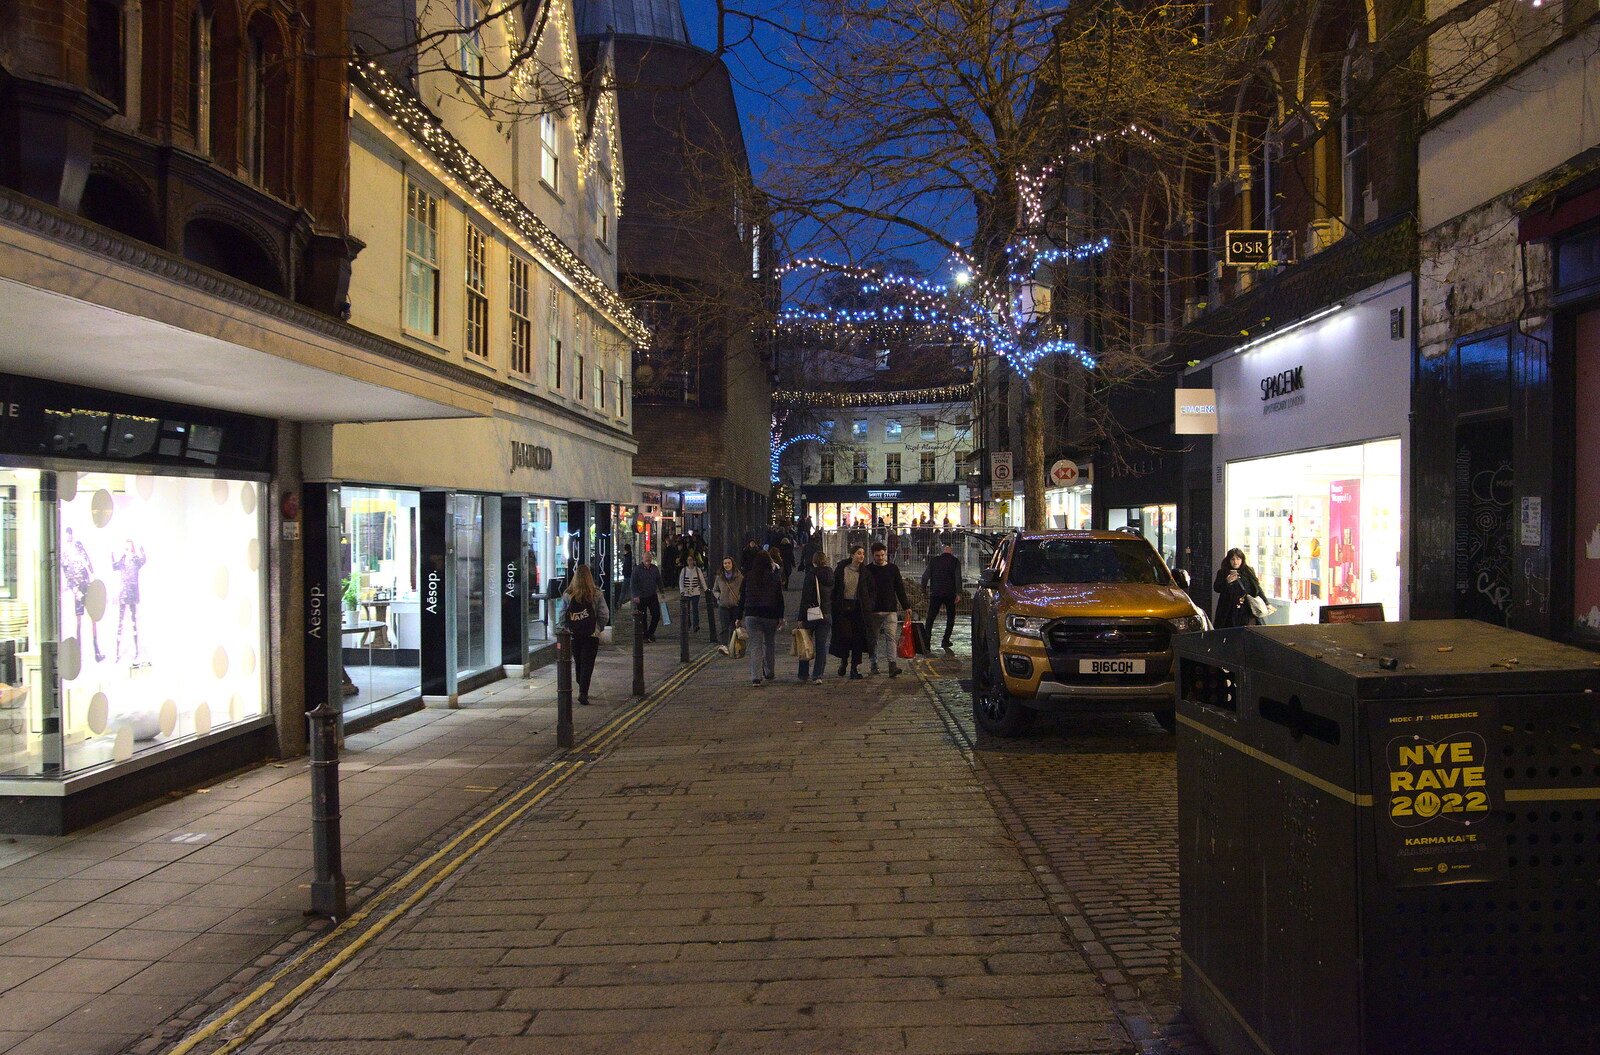 London Street and a bit of Jarrold's from Christmas Shopping in Norwich, Norfolk - 21st December 2022